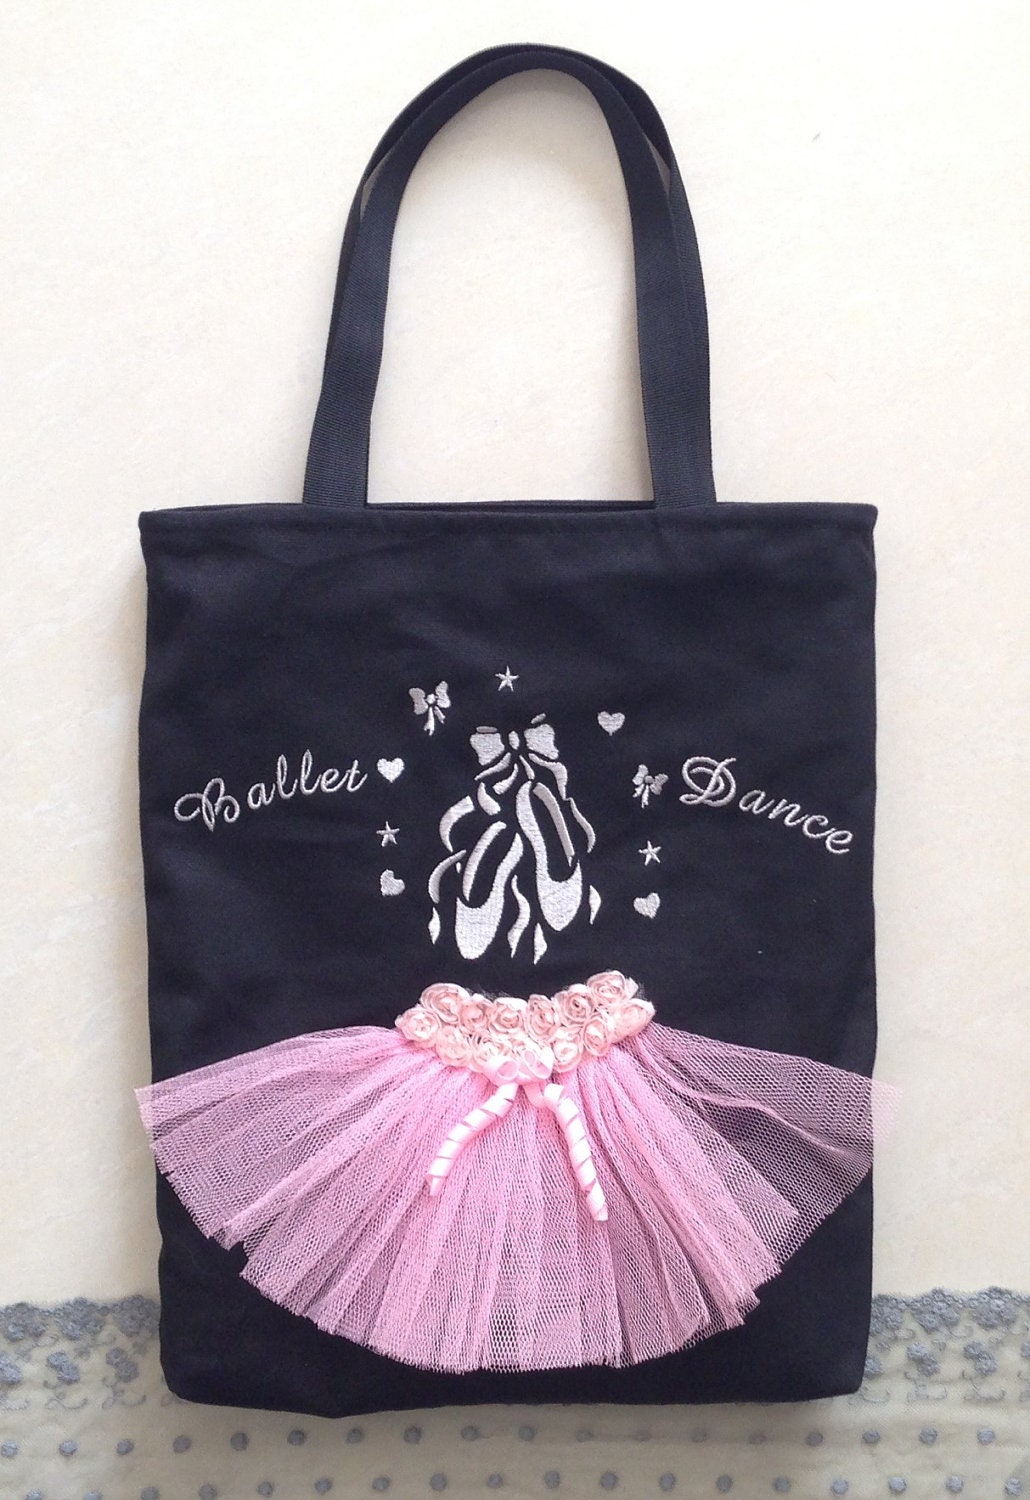 ... tote bag-Embroidery bag-embroidery lining tote bag-Ballet pattern